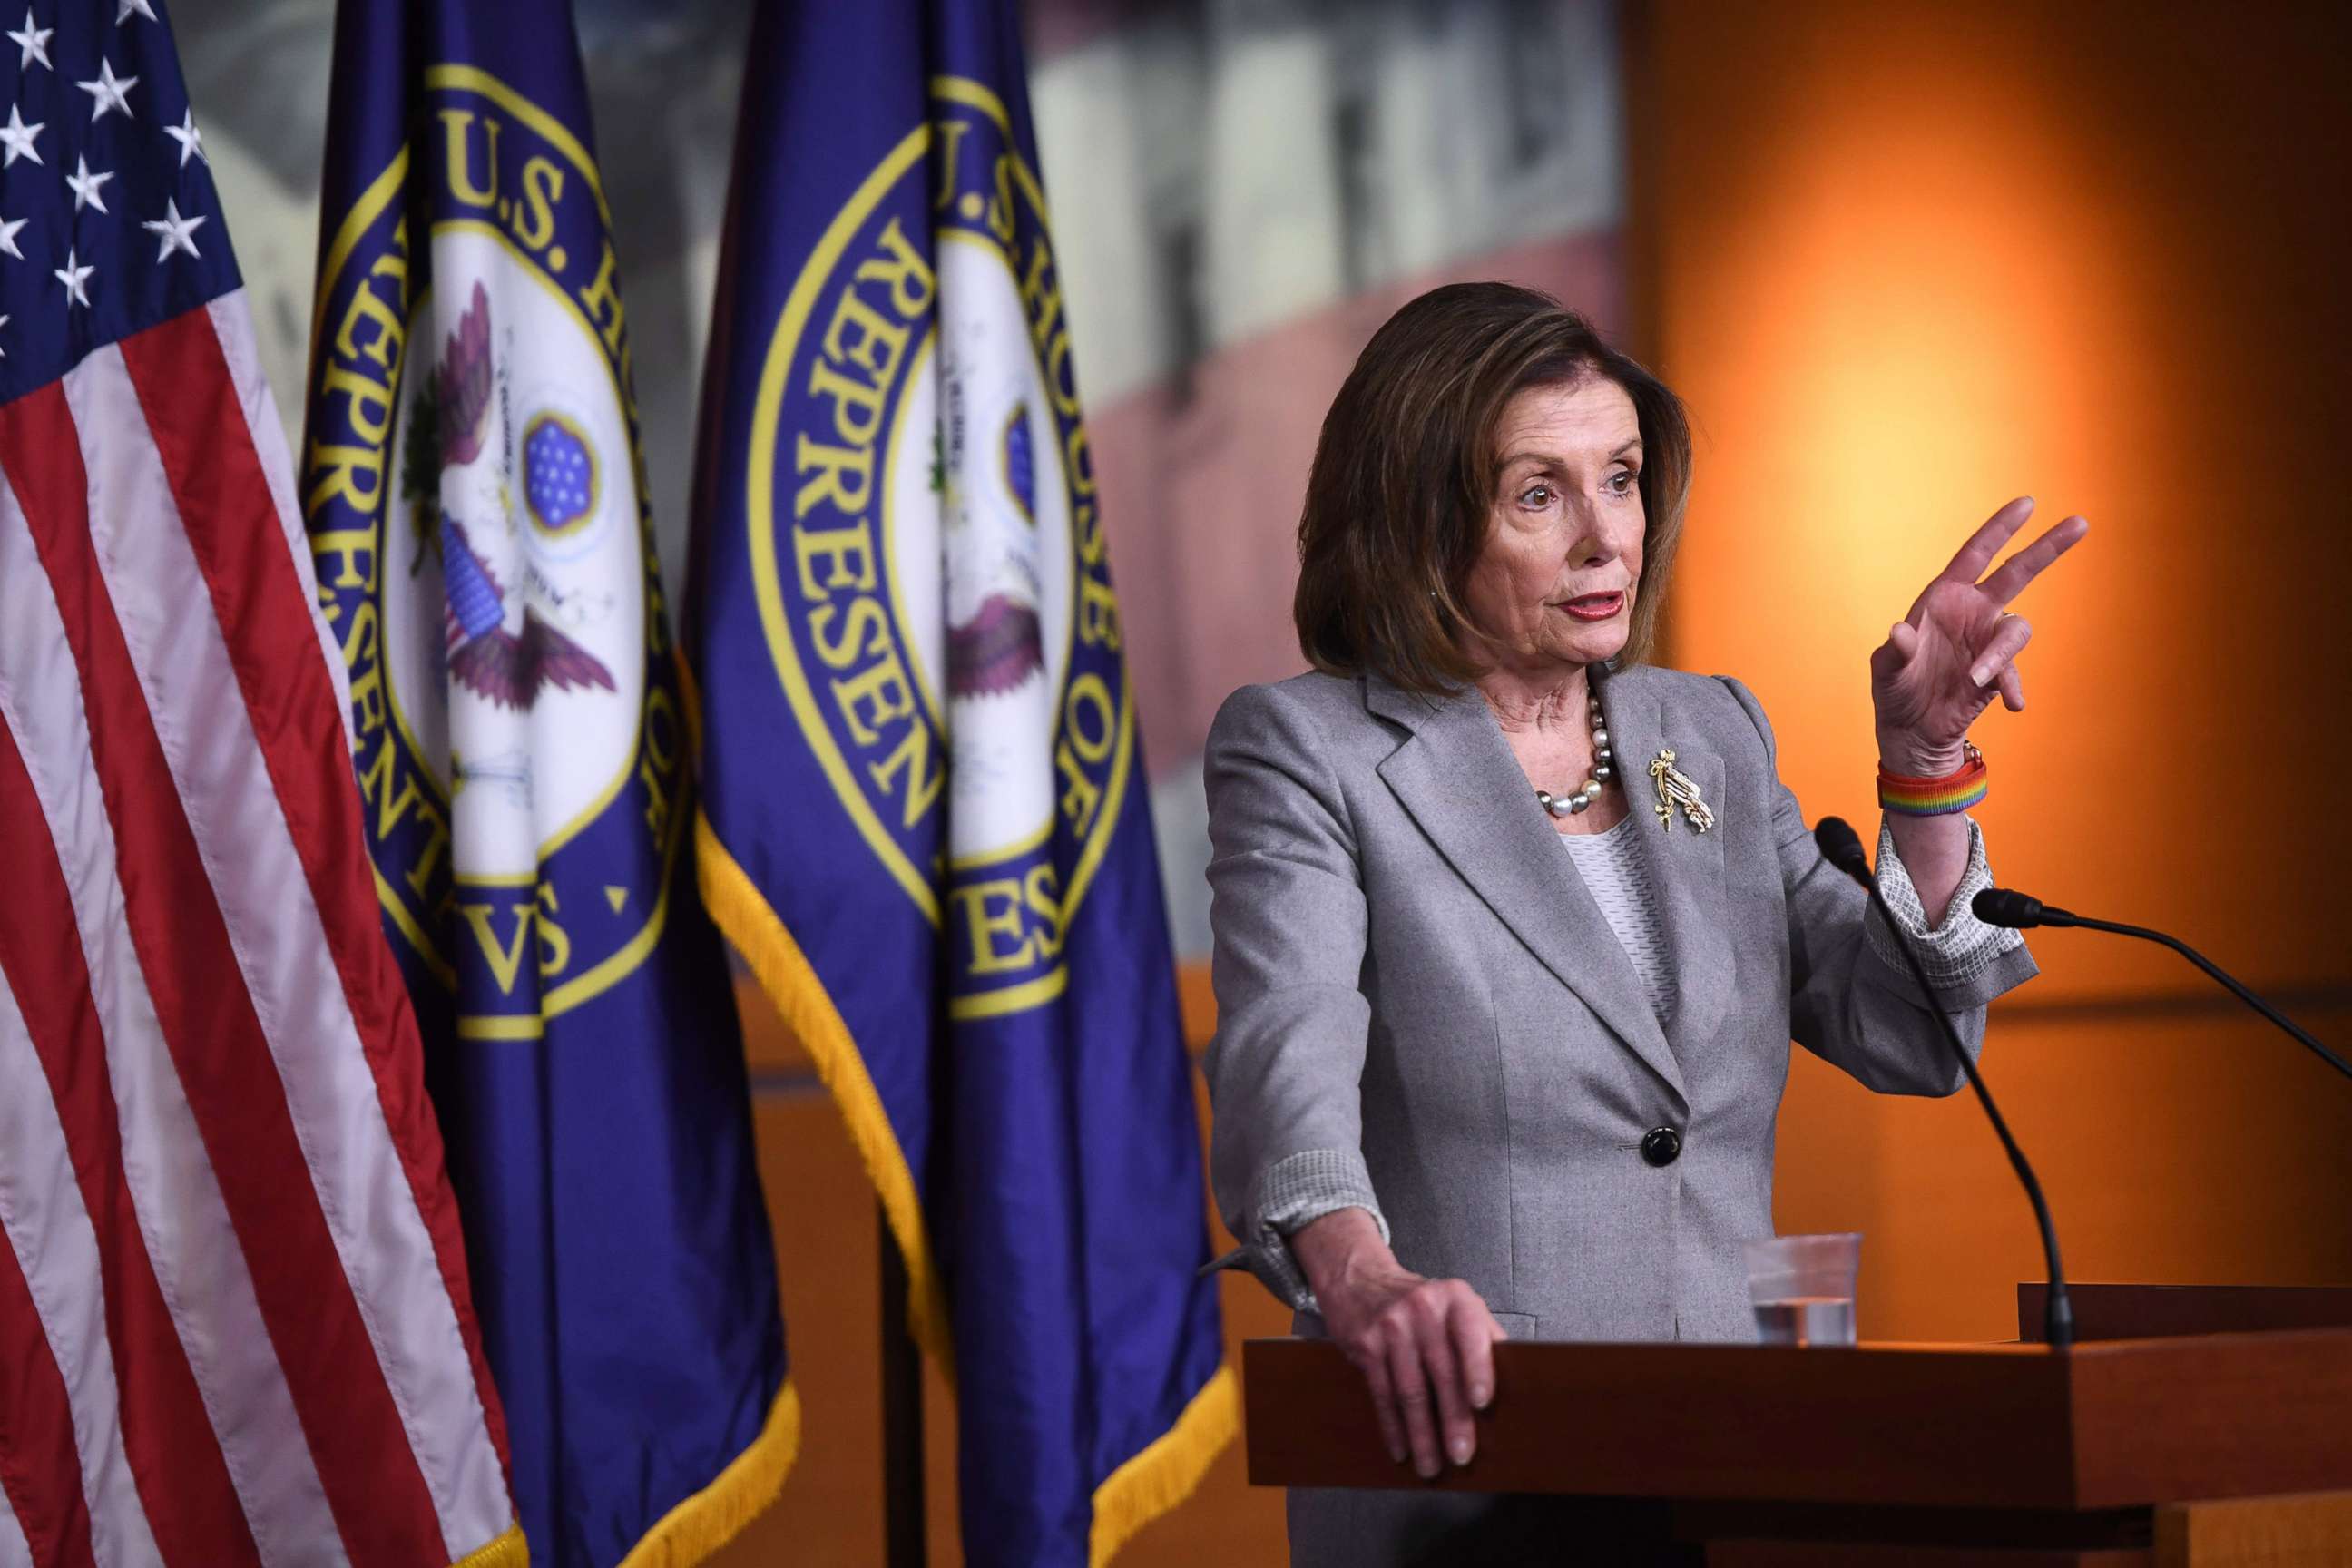 PHOTO: Speaker of the House Nancy Pelosi speaks during her weekly press conference on Dec. 12, 2019, in Washington, D.C.